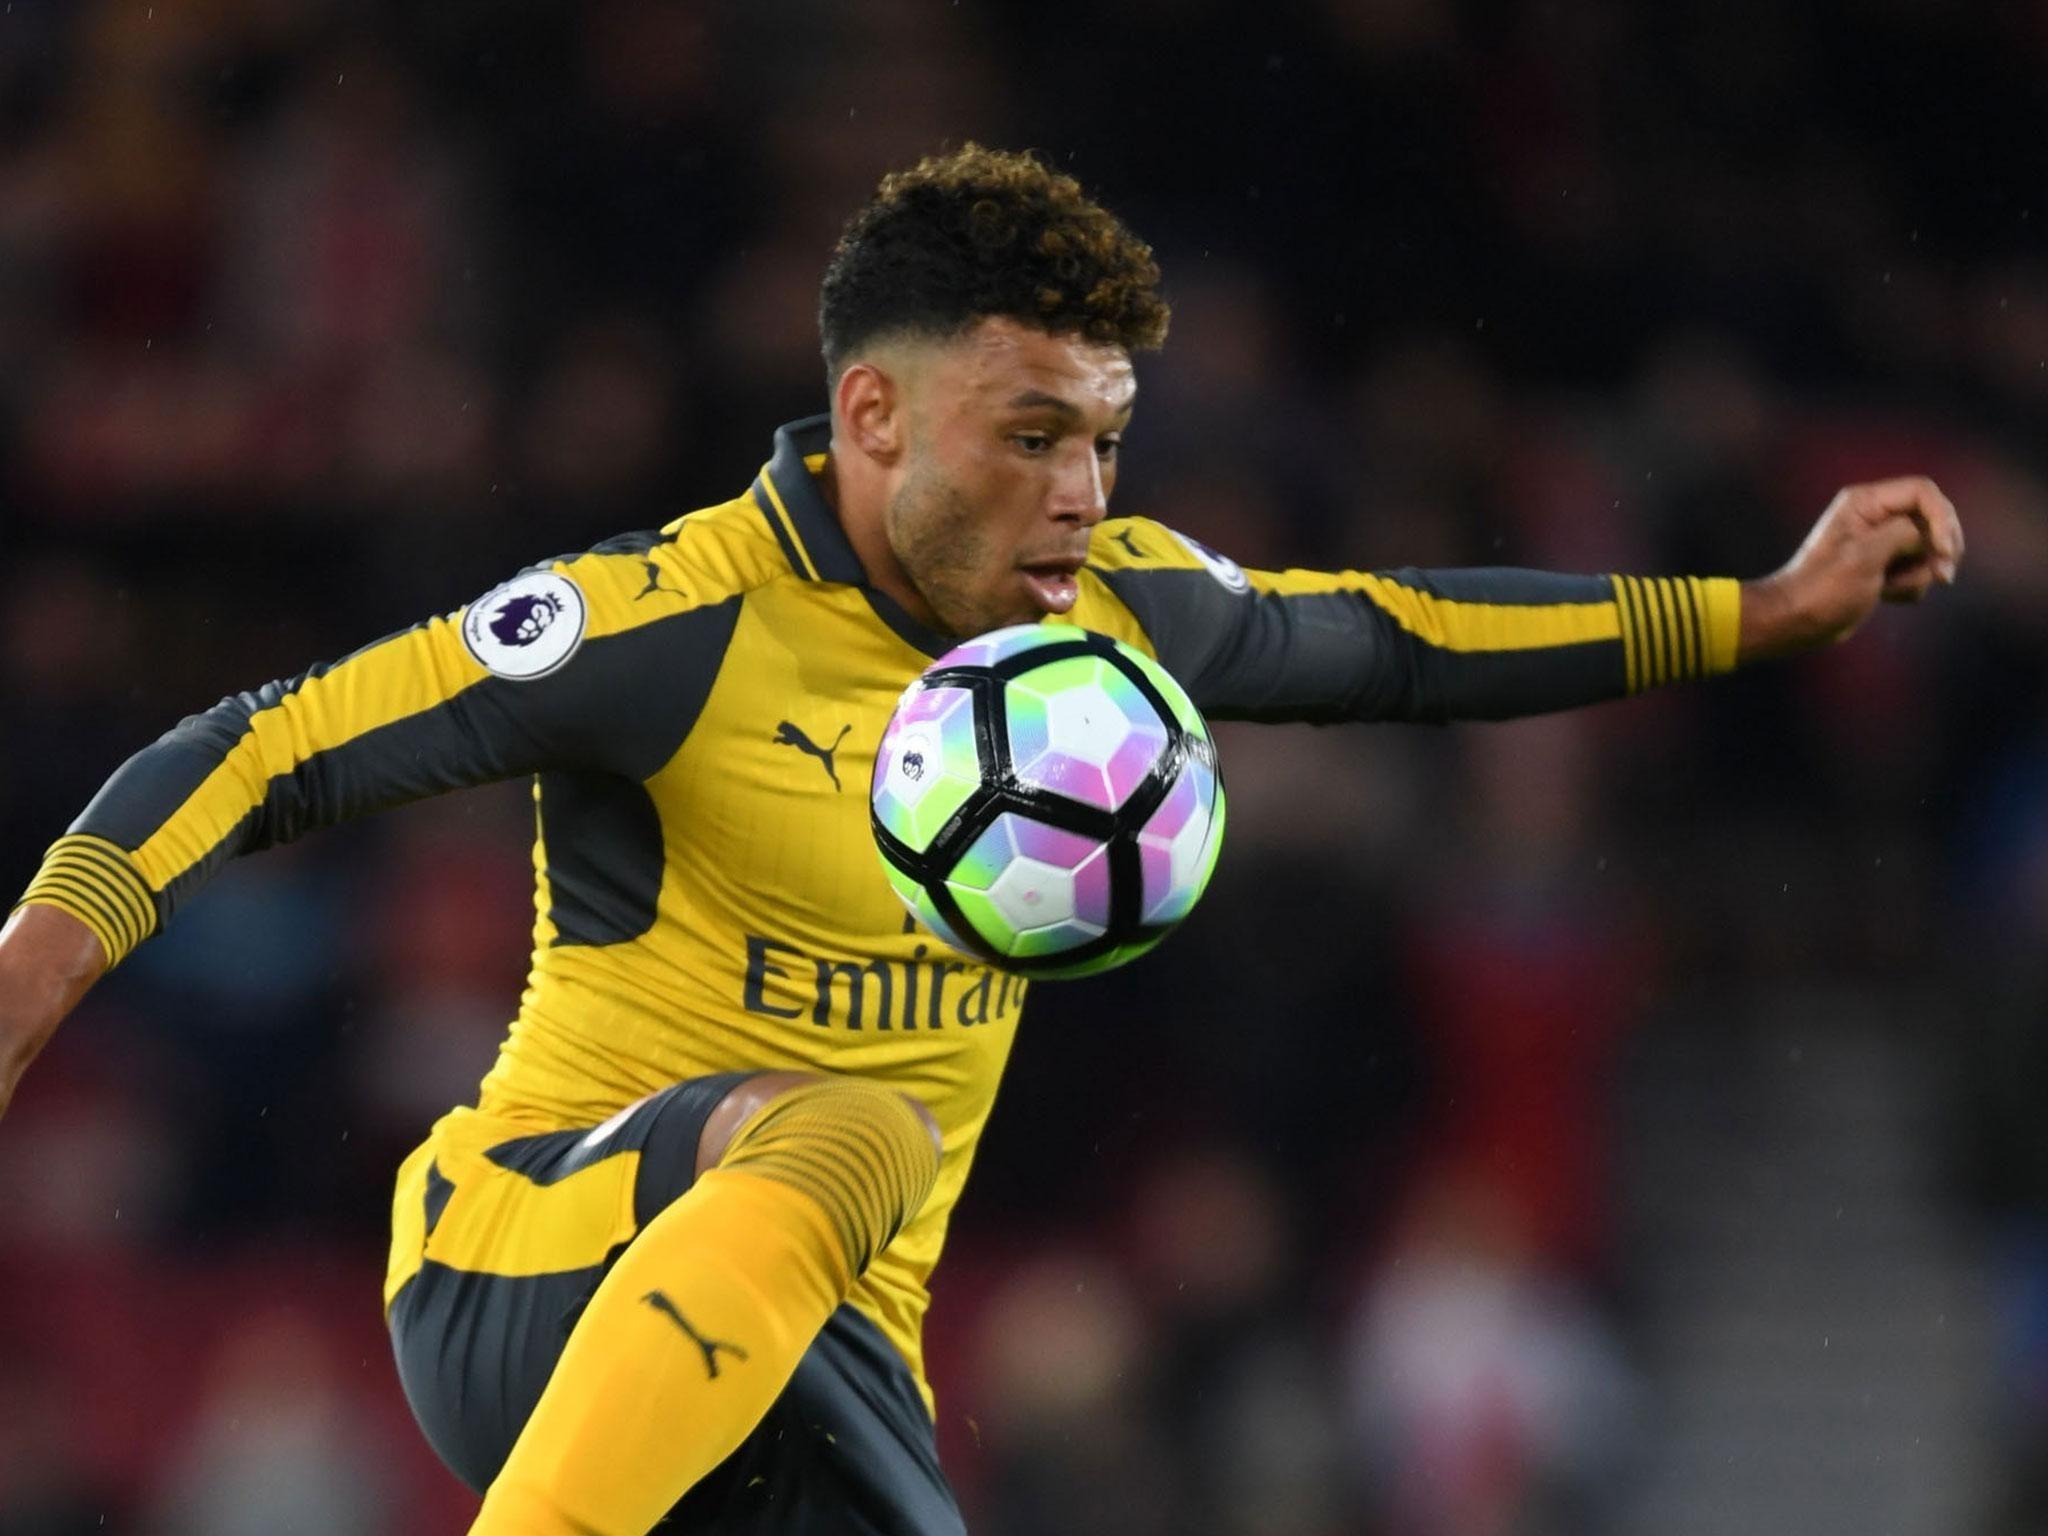 Arsenal have taken responsibility for poor form says Alex Oxlade